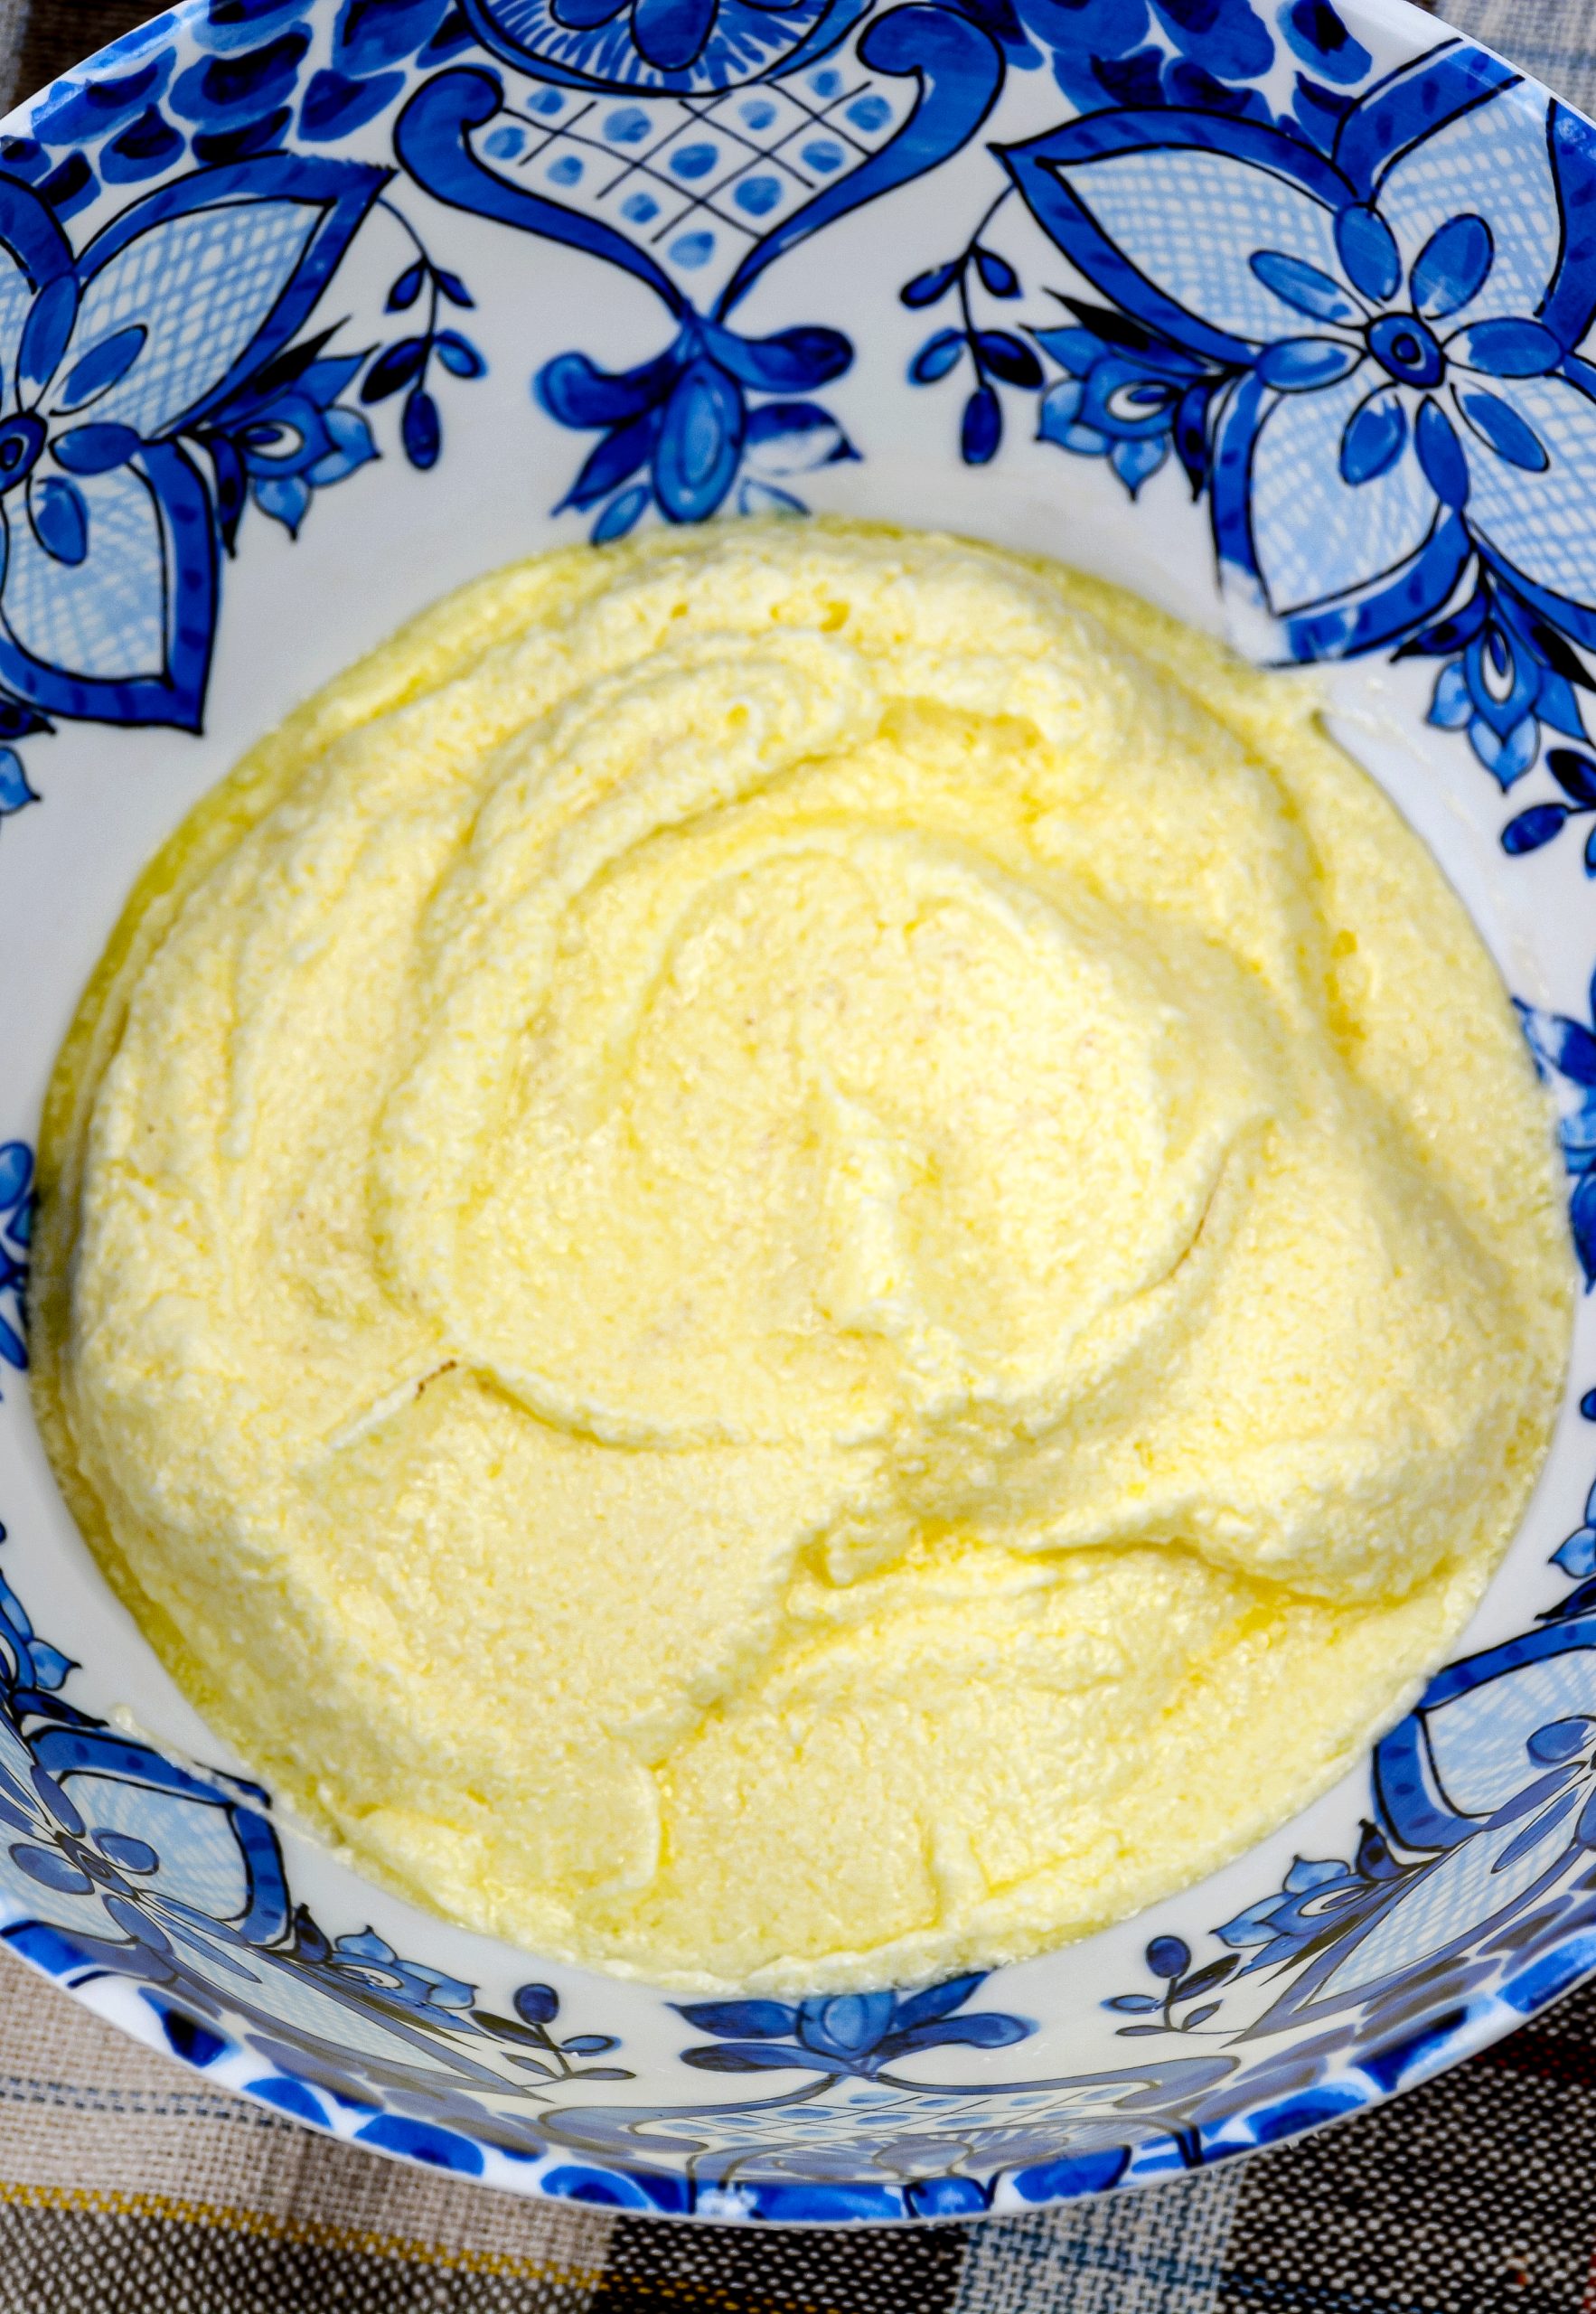 Add melted butter in a mixing bowl, add sugar and using an electric mixer cream the butter and sugar.